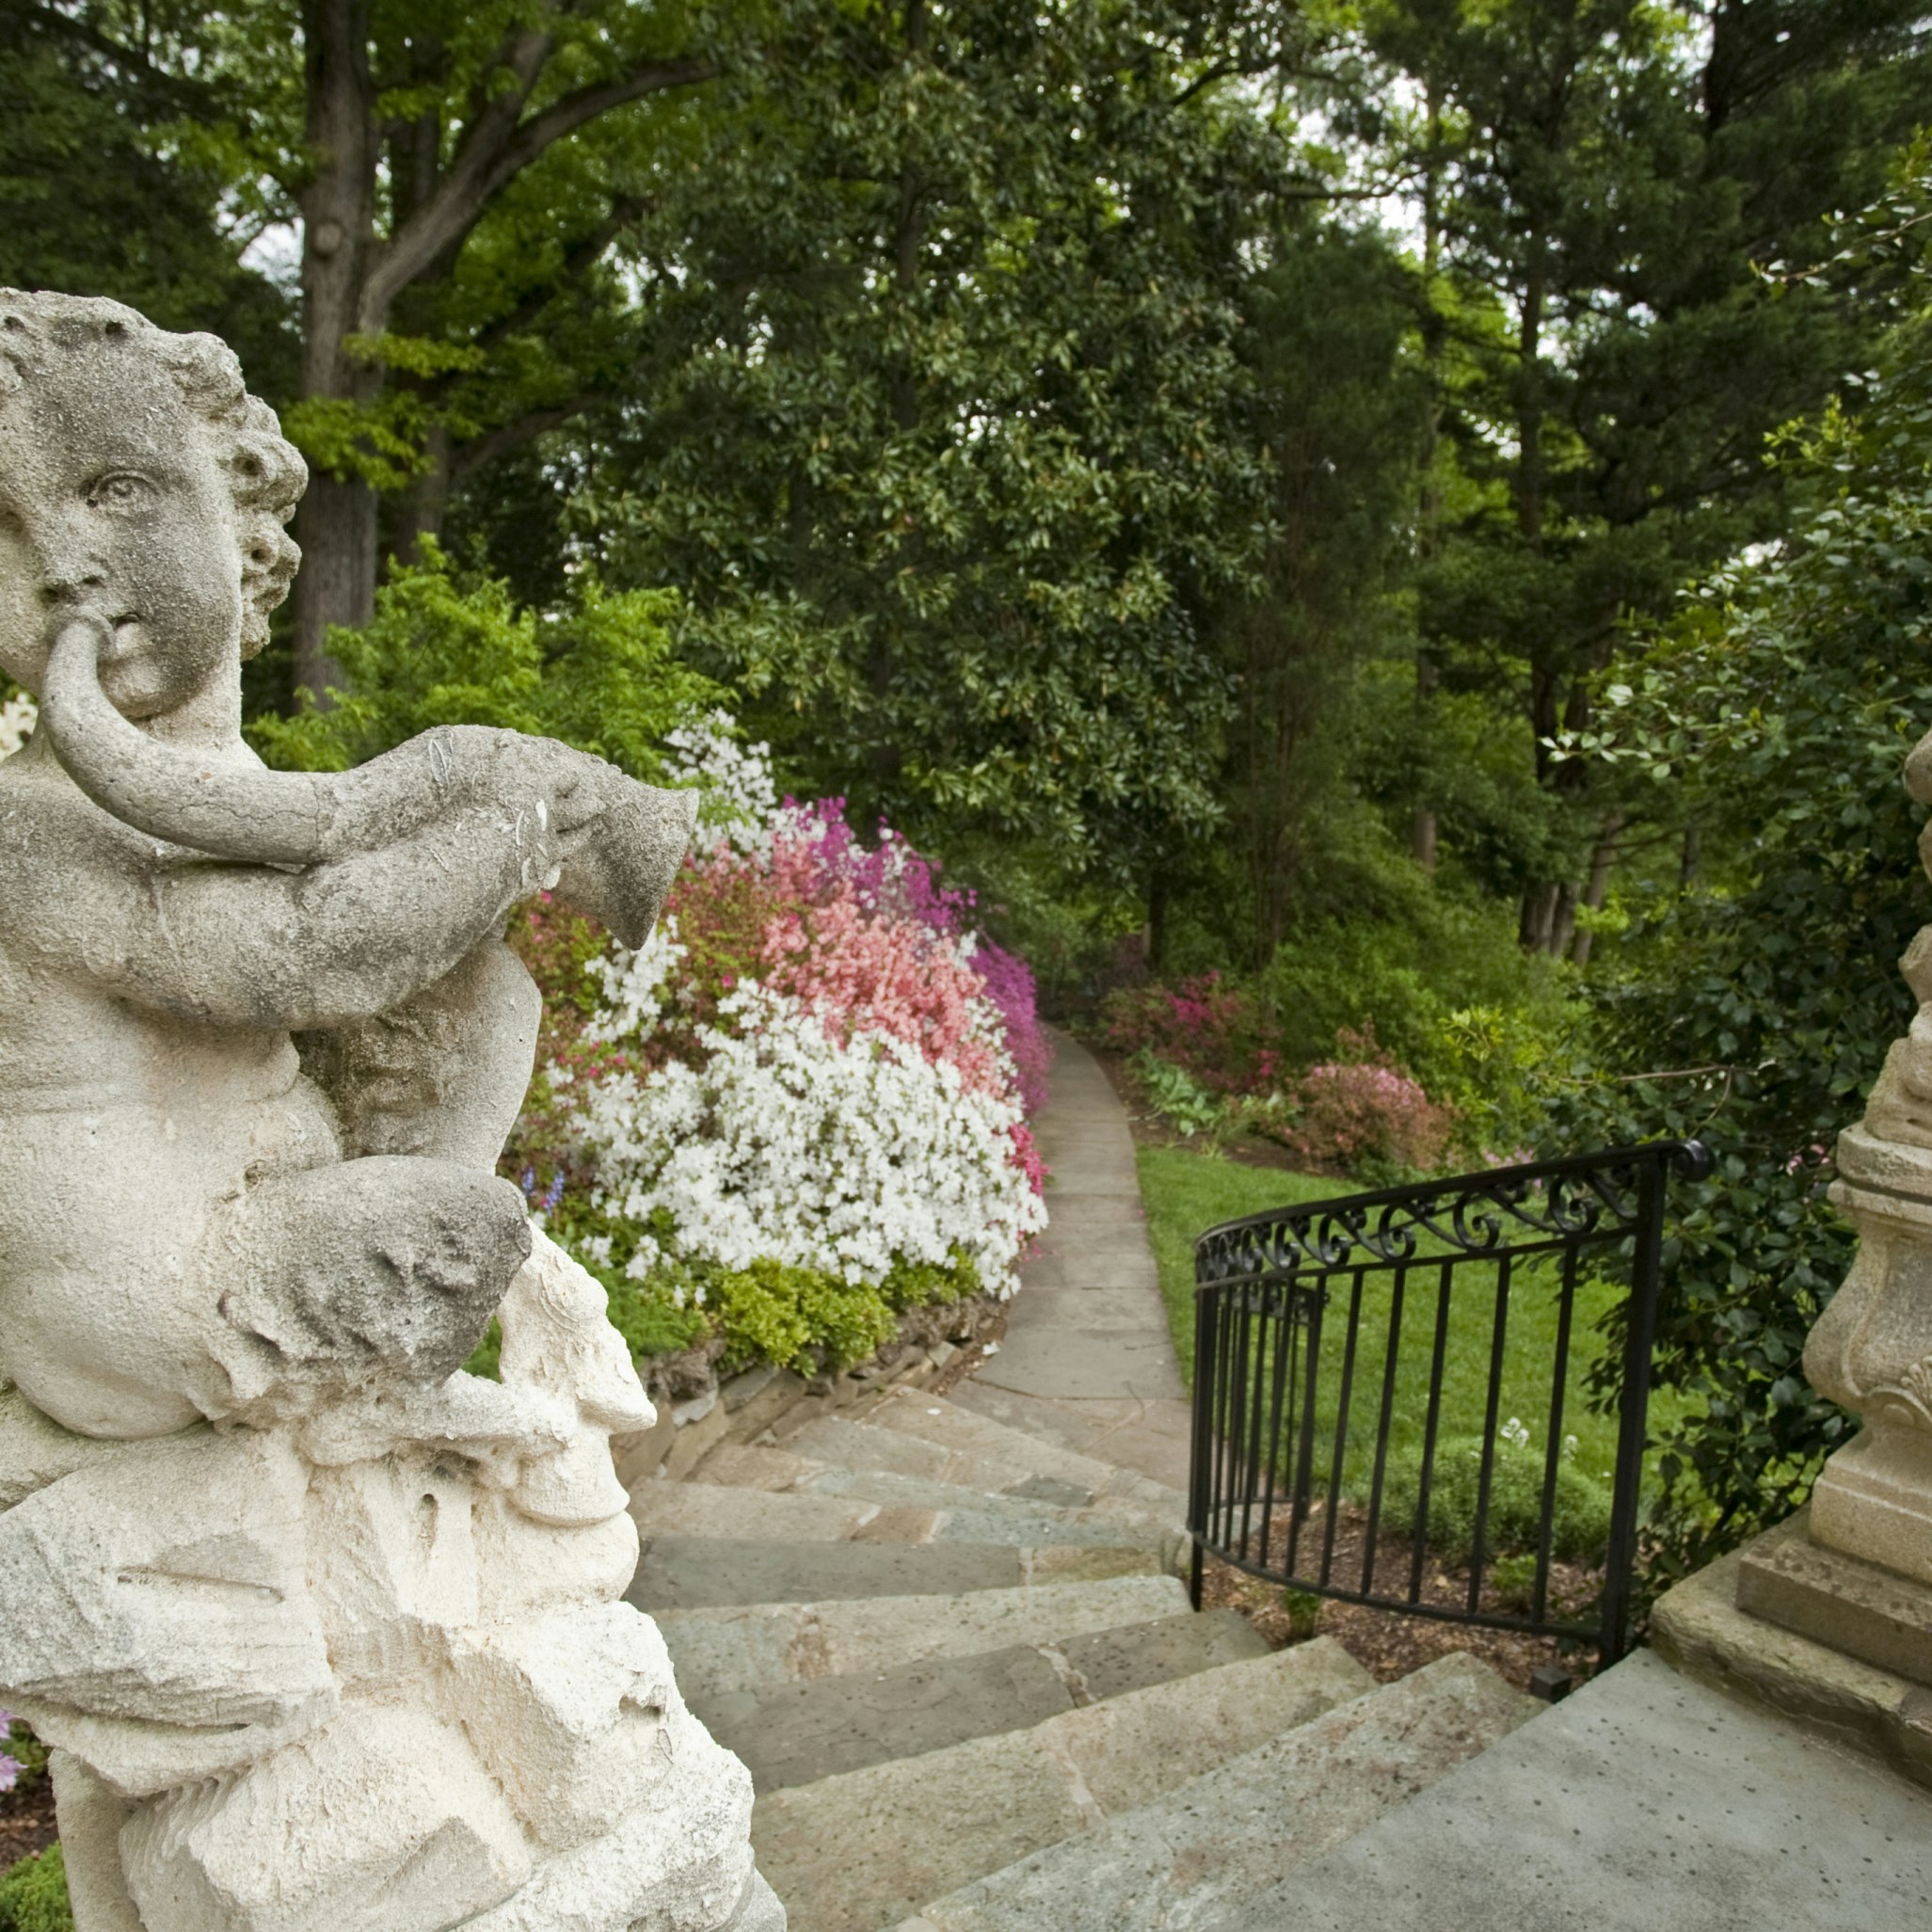 Satyr statute welcomes visitor to Hillwood Gardens, Washington, DC.